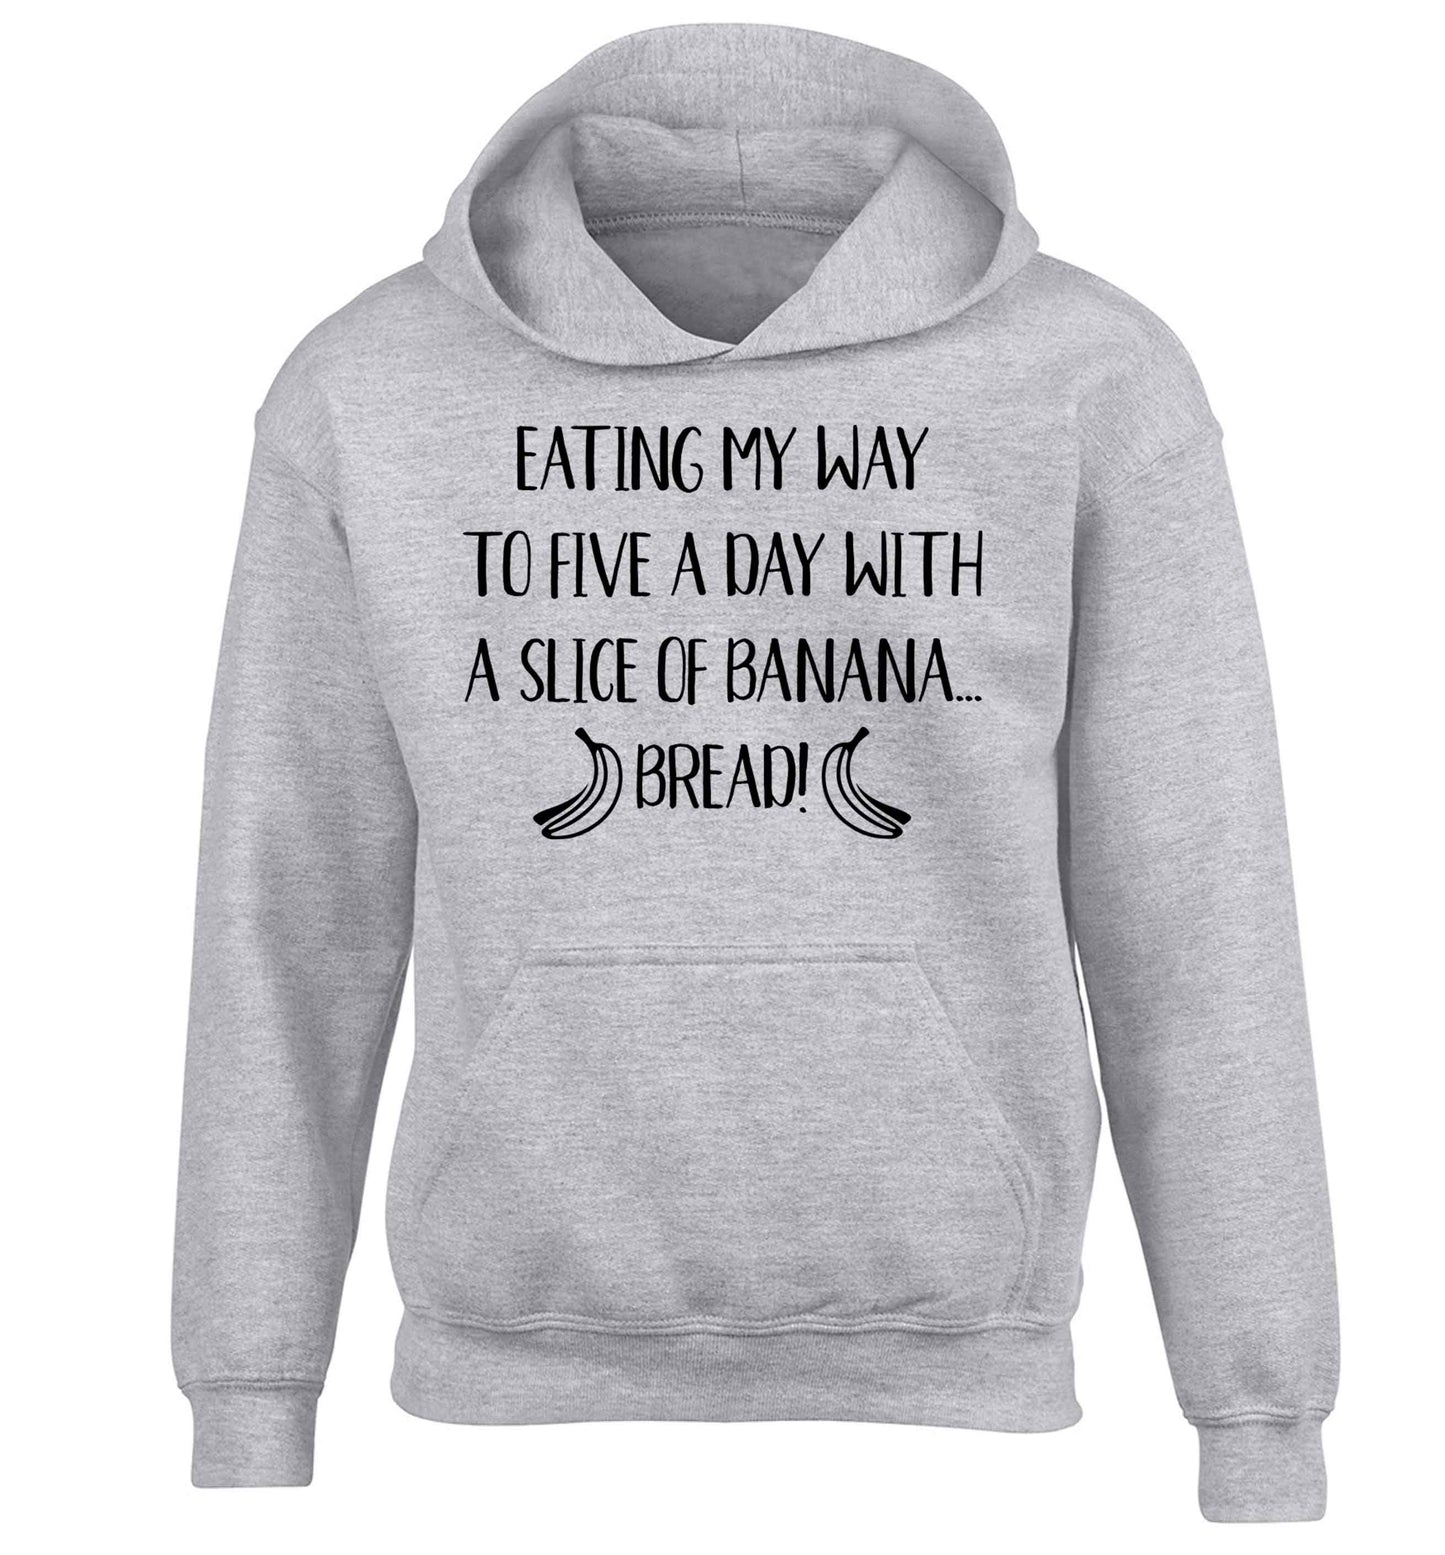 Eating my way to five a day with a slice of banana bread children's grey hoodie 12-13 Years